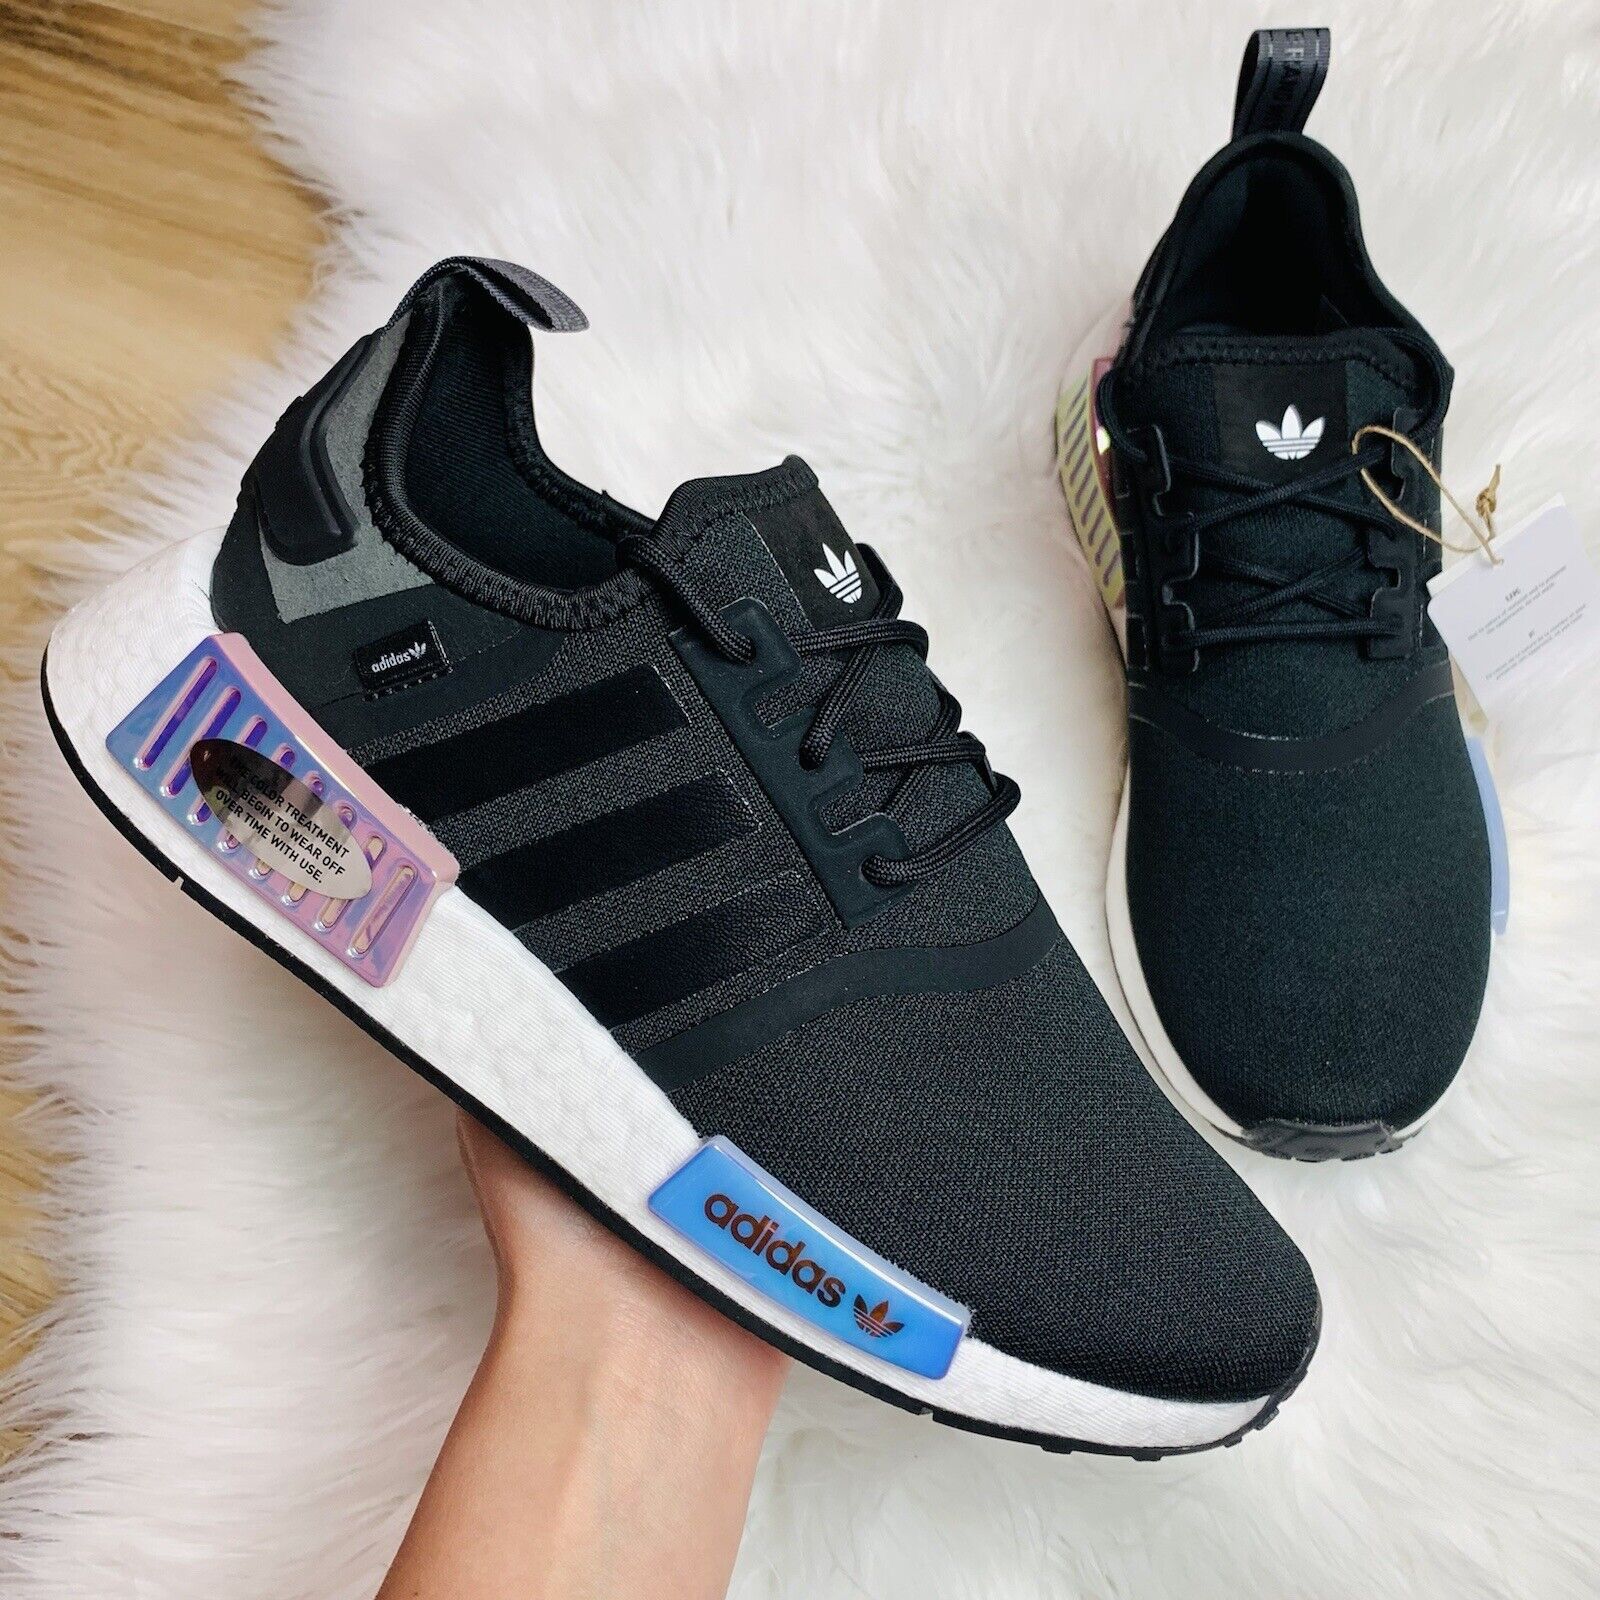 sokker sagtmodighed bleg NEW Adidas Women's NMD R1 Running Shoes - Parley Black Magic Mauve - Size  7.5 for Sale in Covina, CA - OfferUp